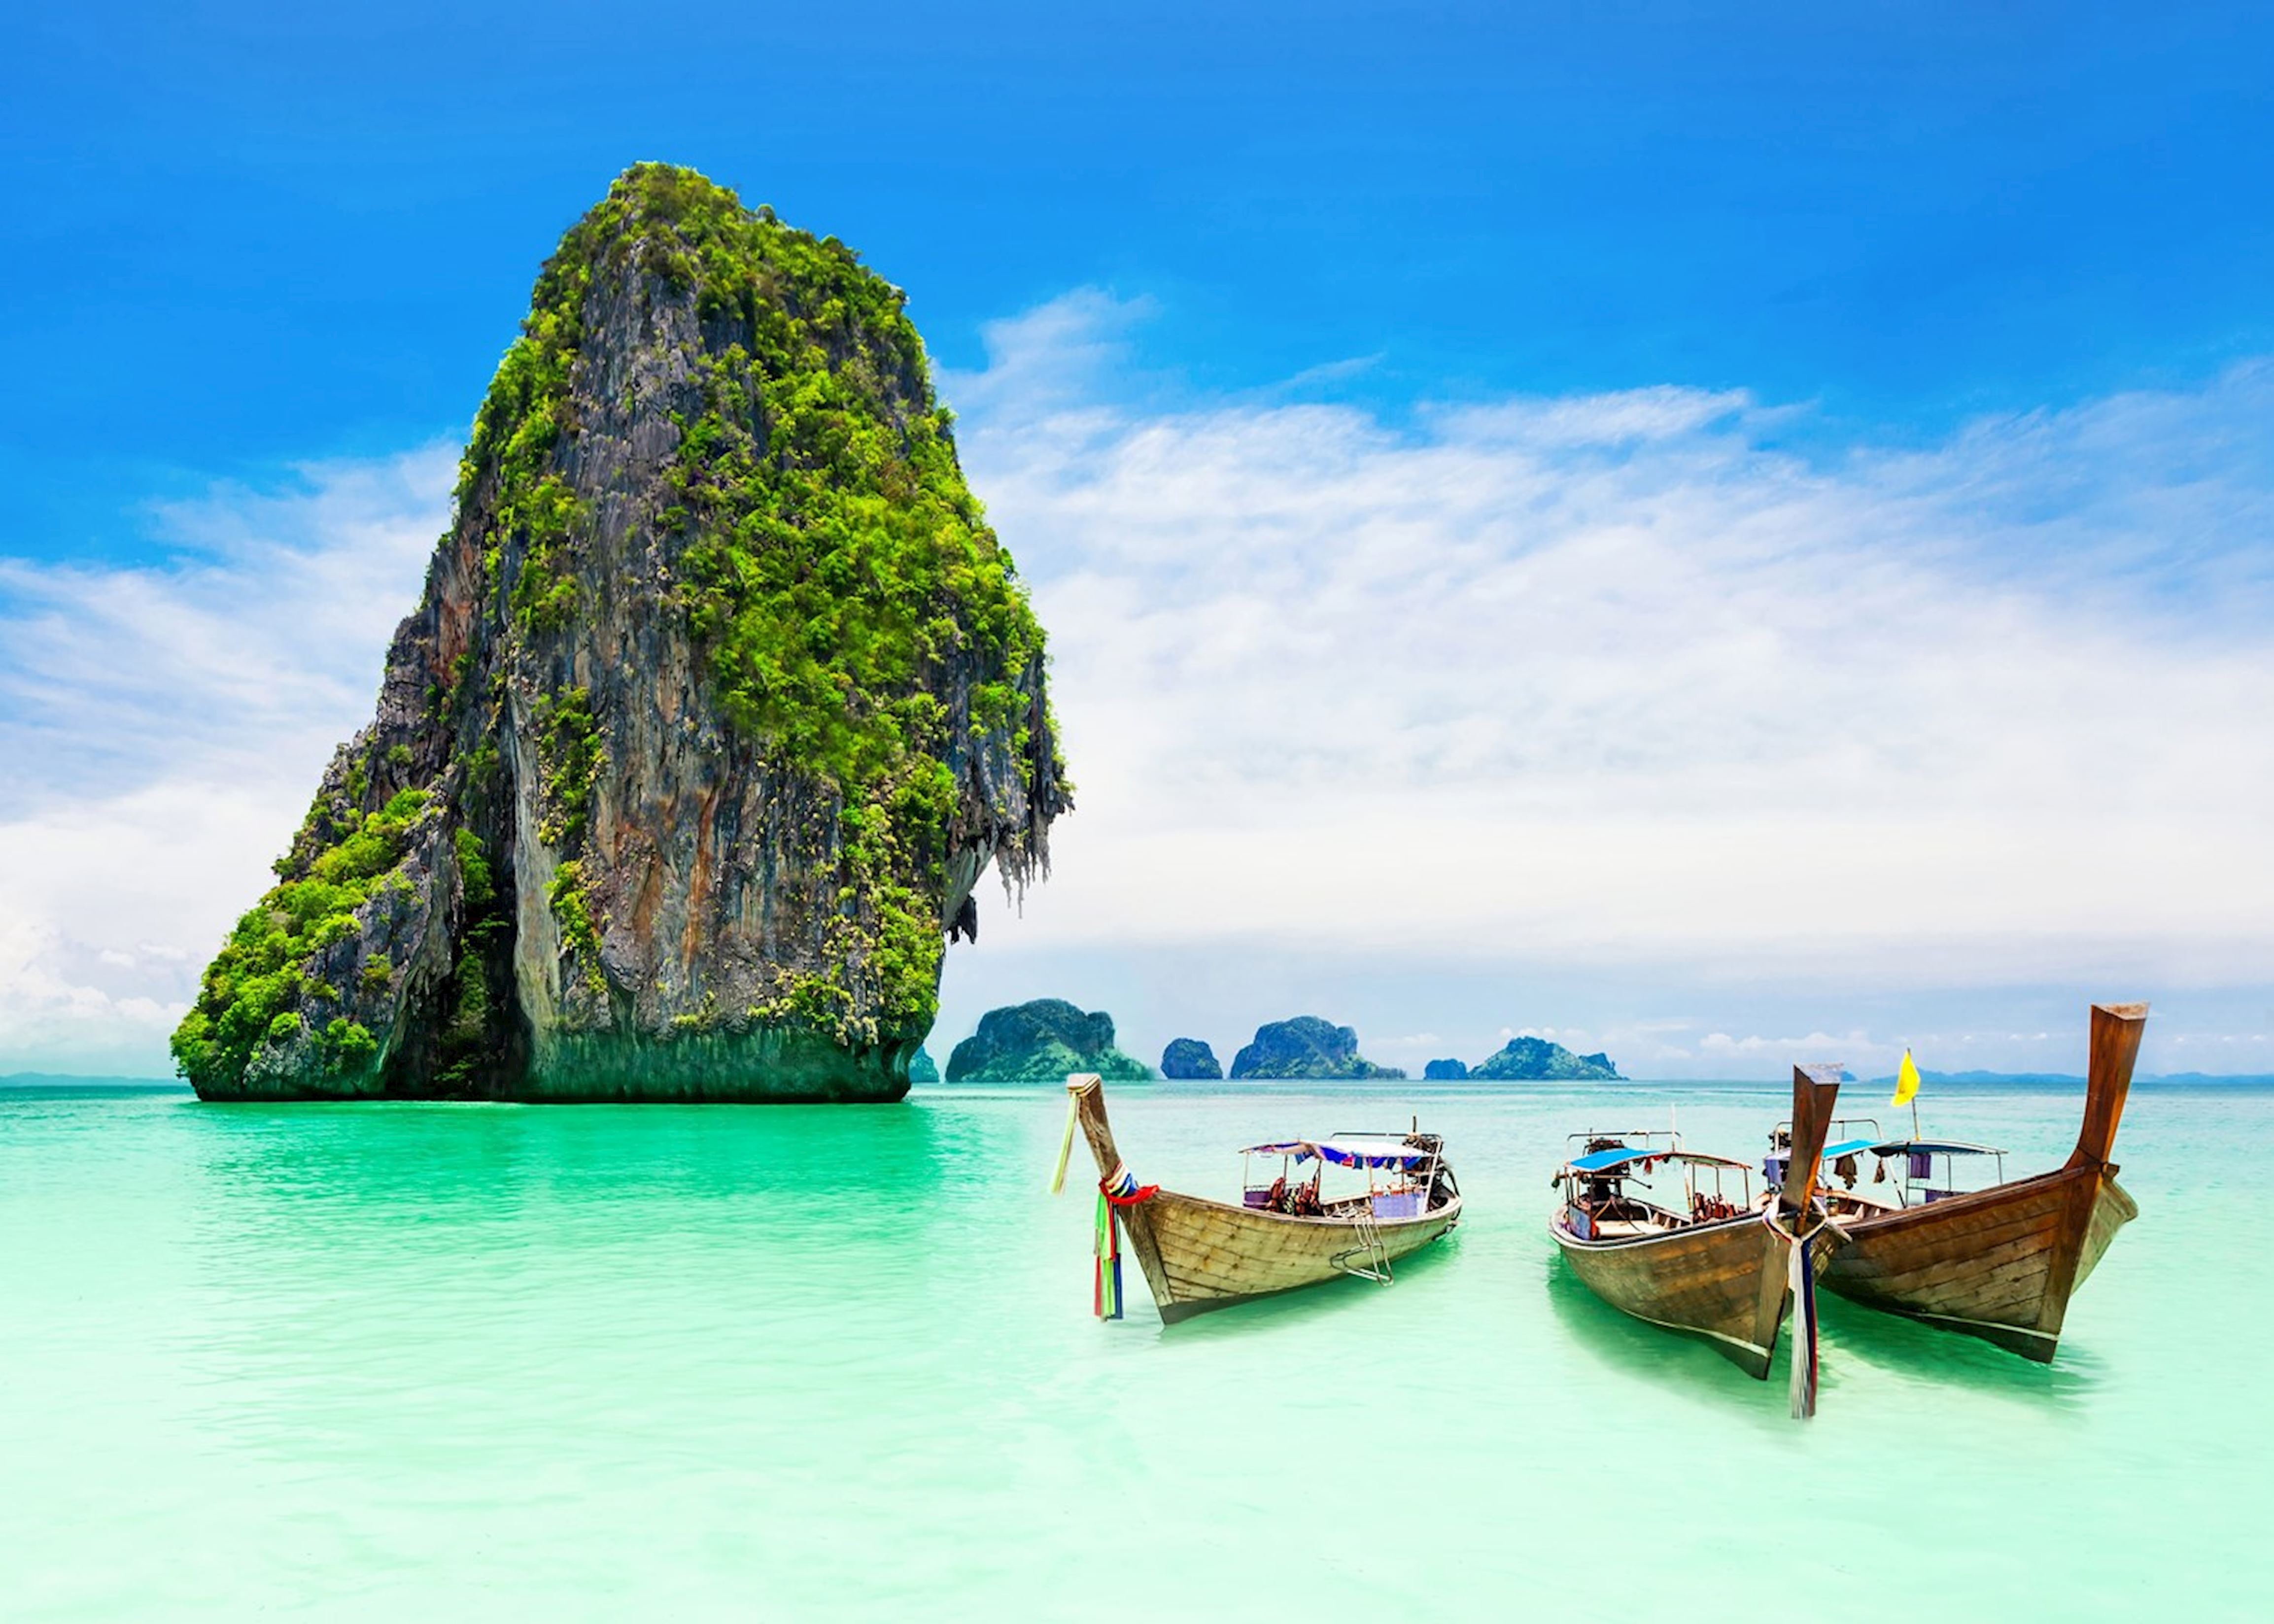 Thaialand Tour Package